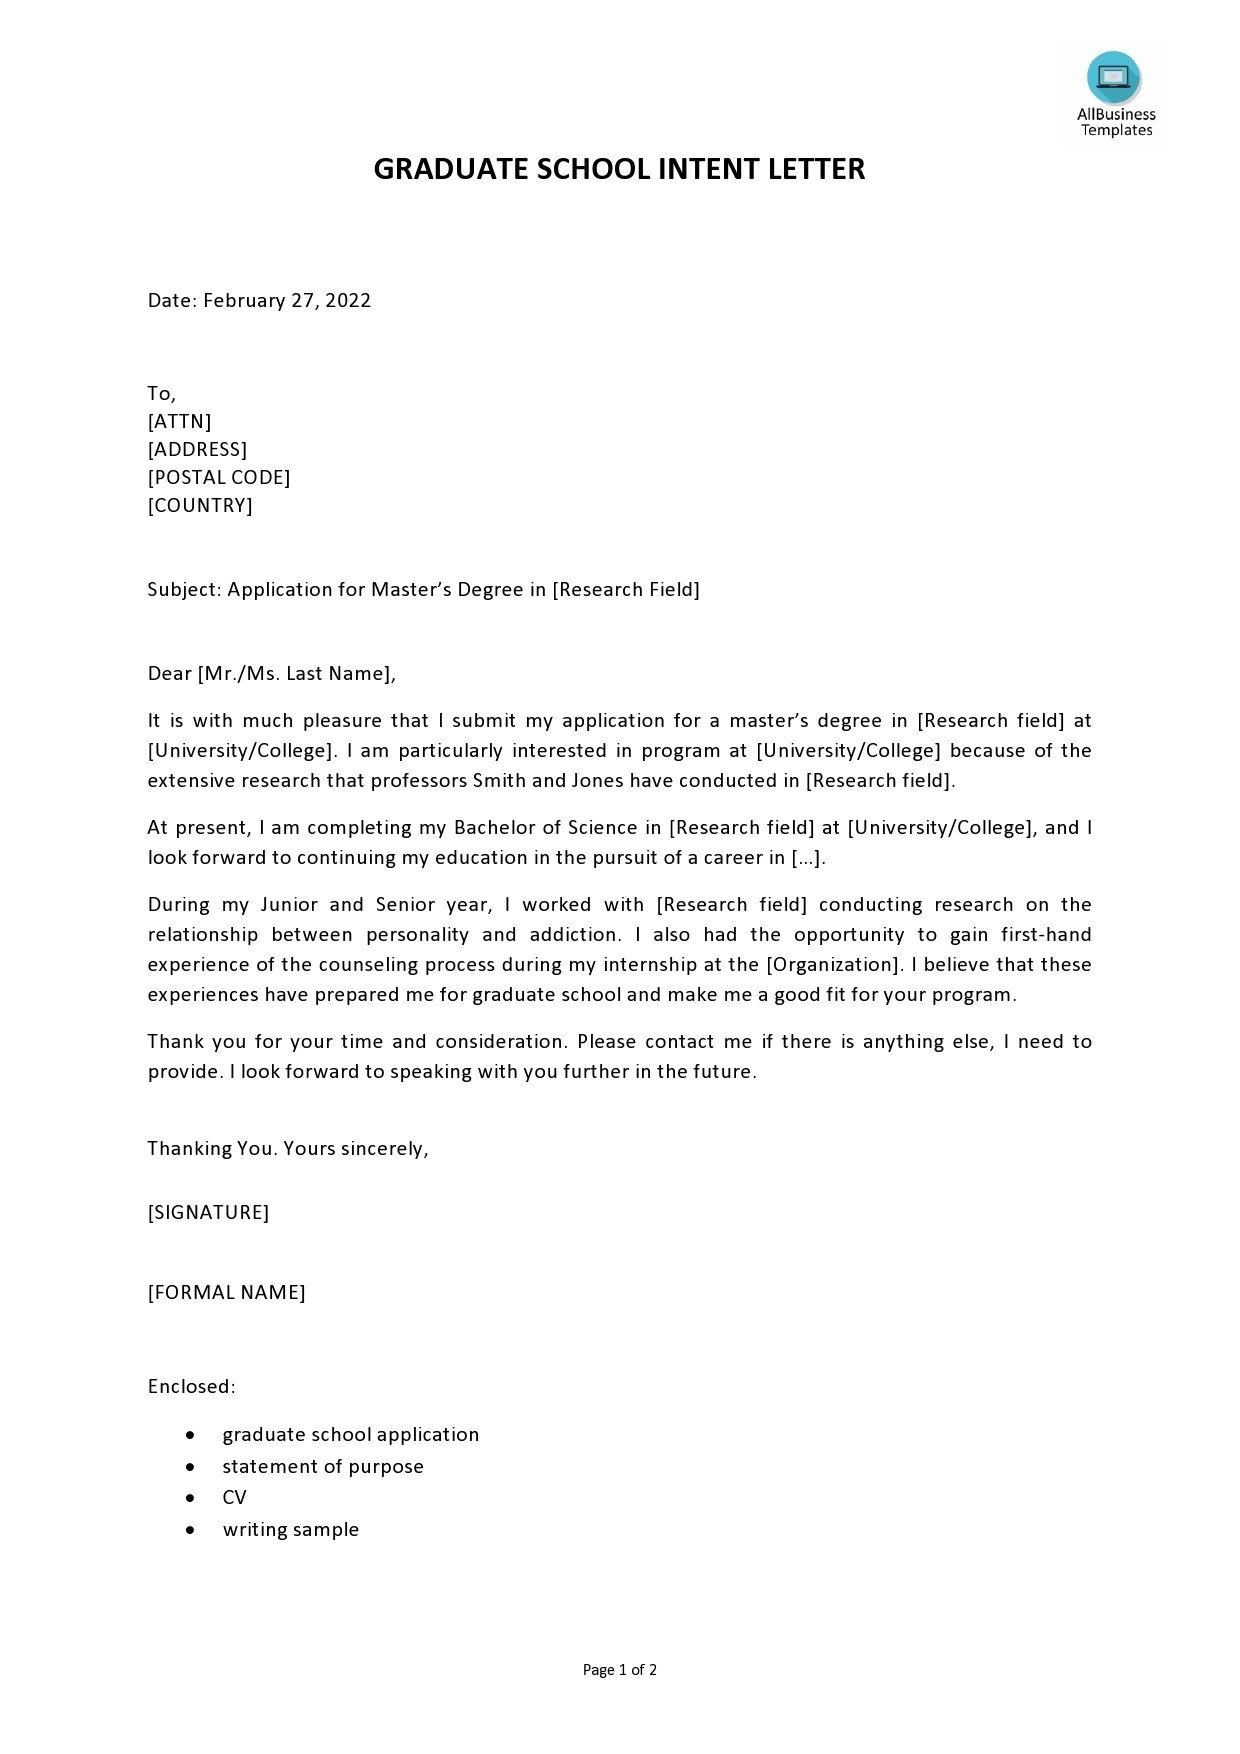 Free letter of intent for graduate school 05